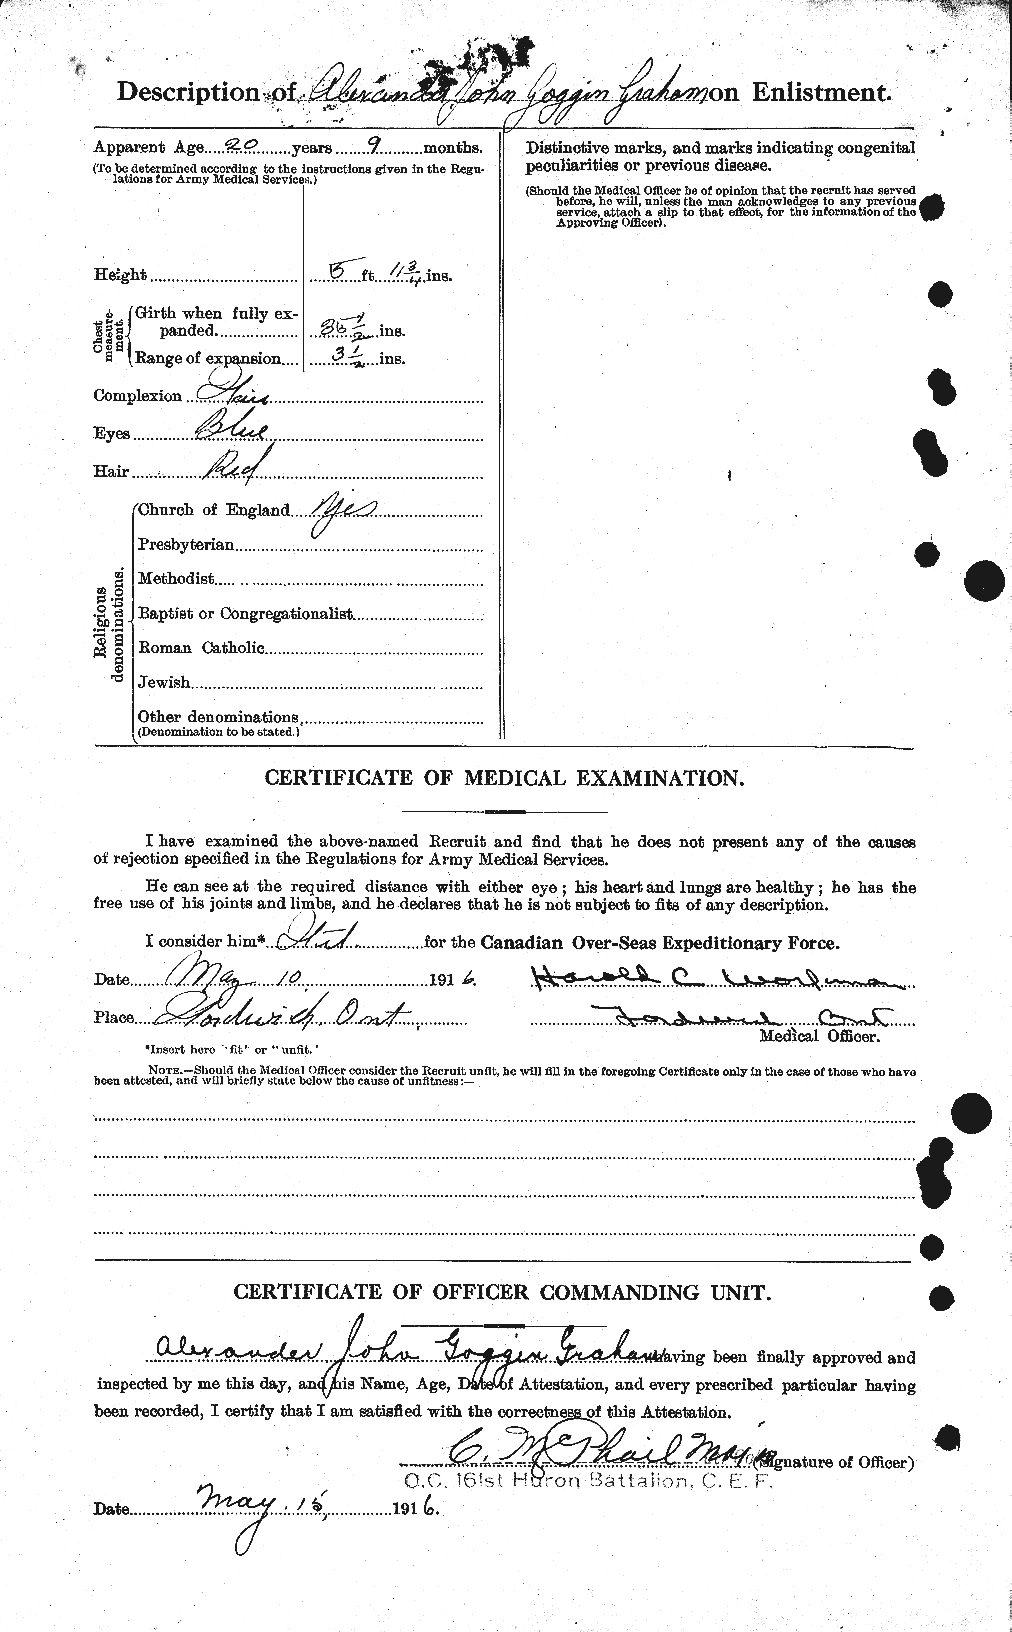 Personnel Records of the First World War - CEF 359592b